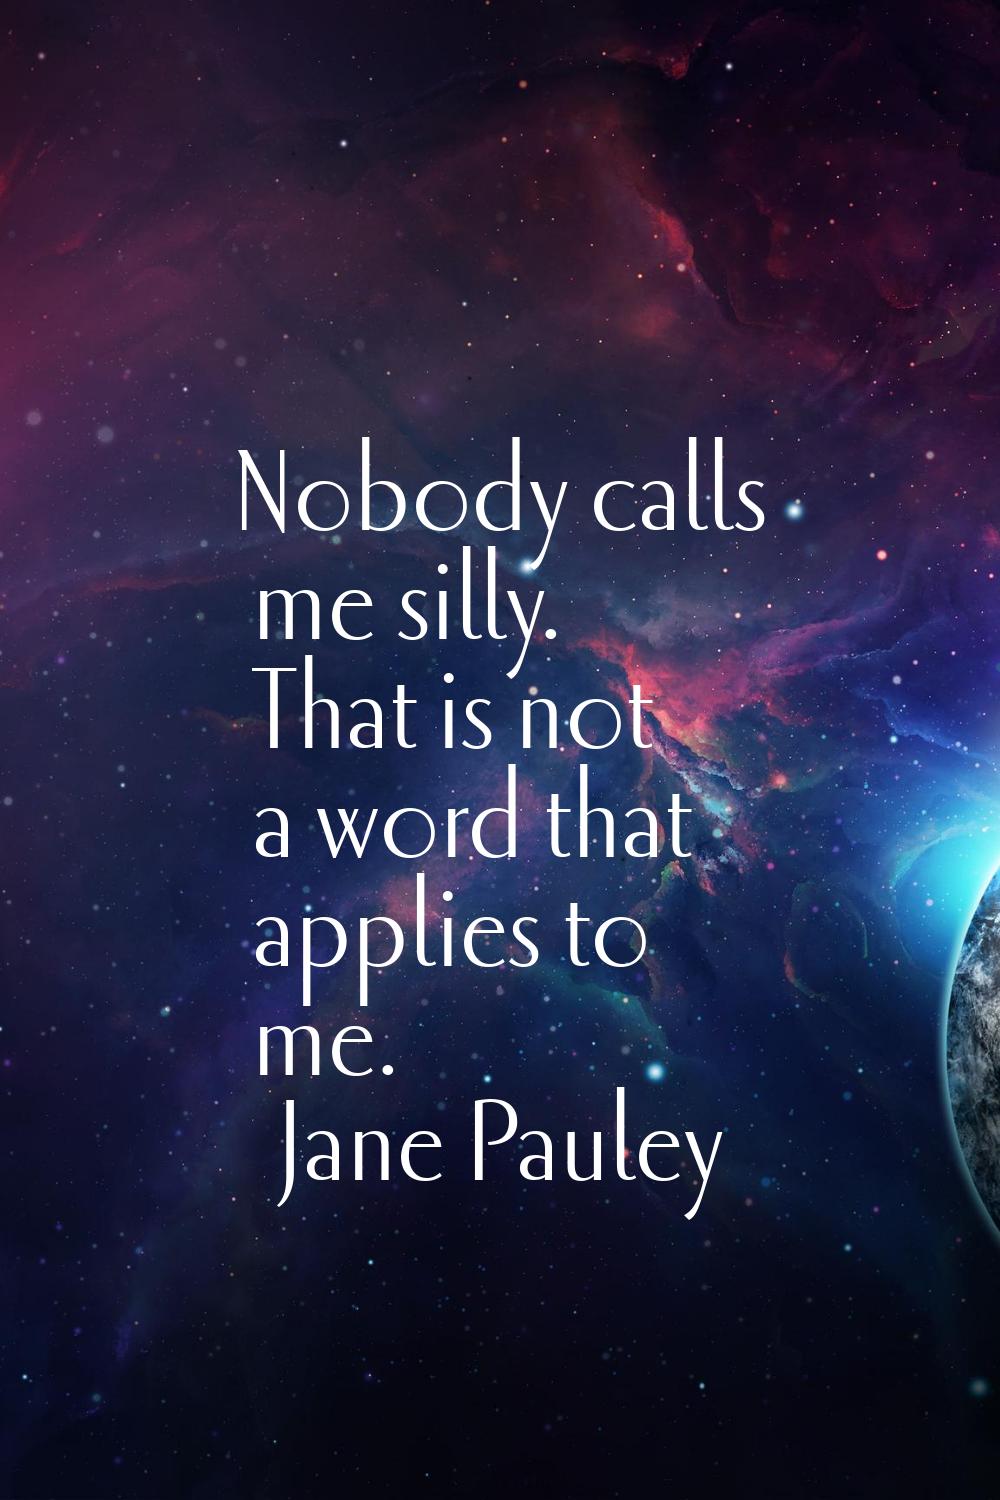 Nobody calls me silly. That is not a word that applies to me.